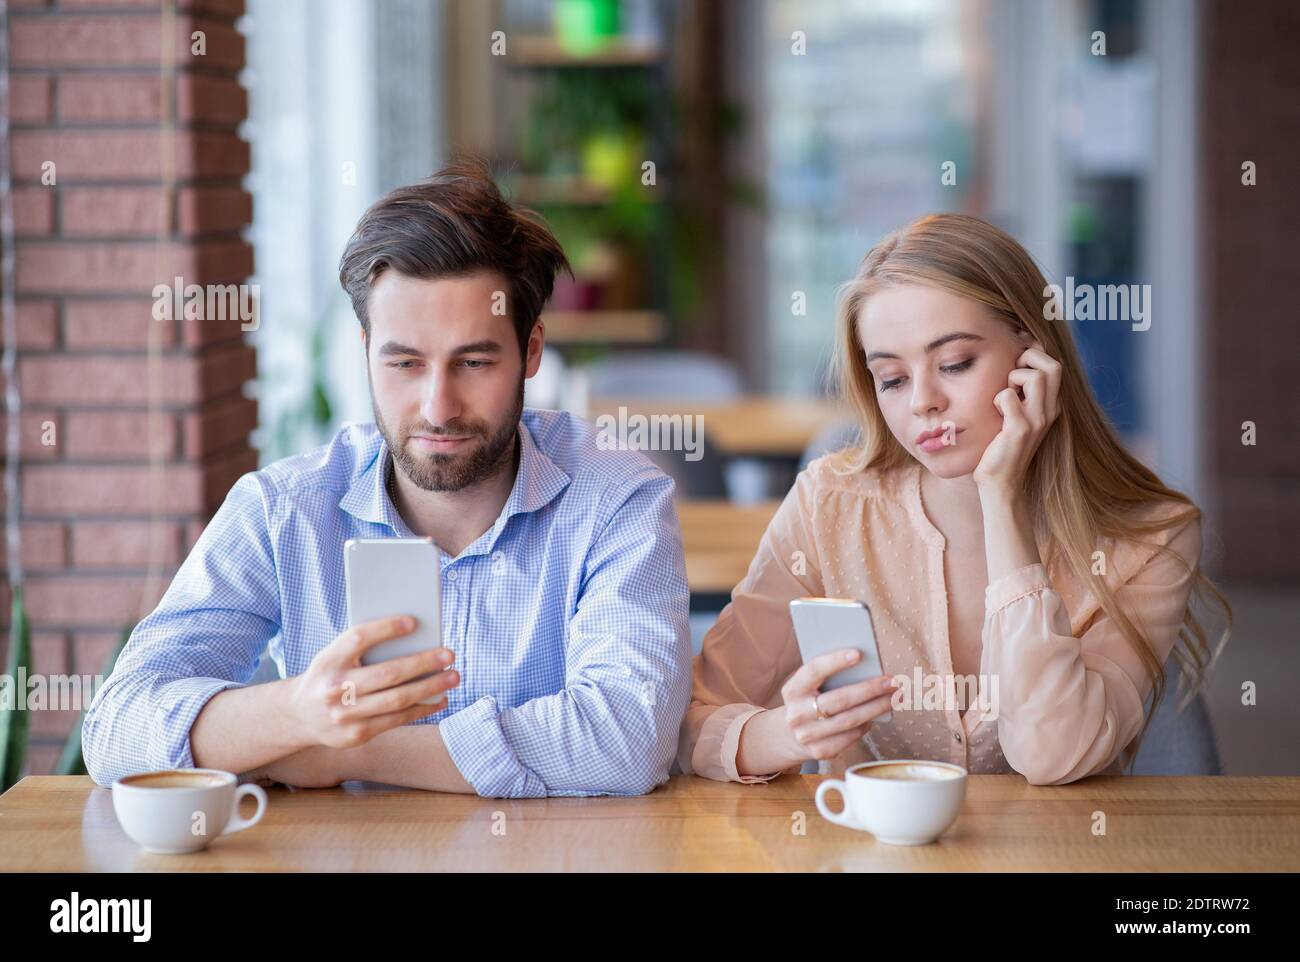 Smartphone addiction and phubbing concept. Young couple on boring date, stuck in gadgets, neglecting each other at cafe Stock Photo